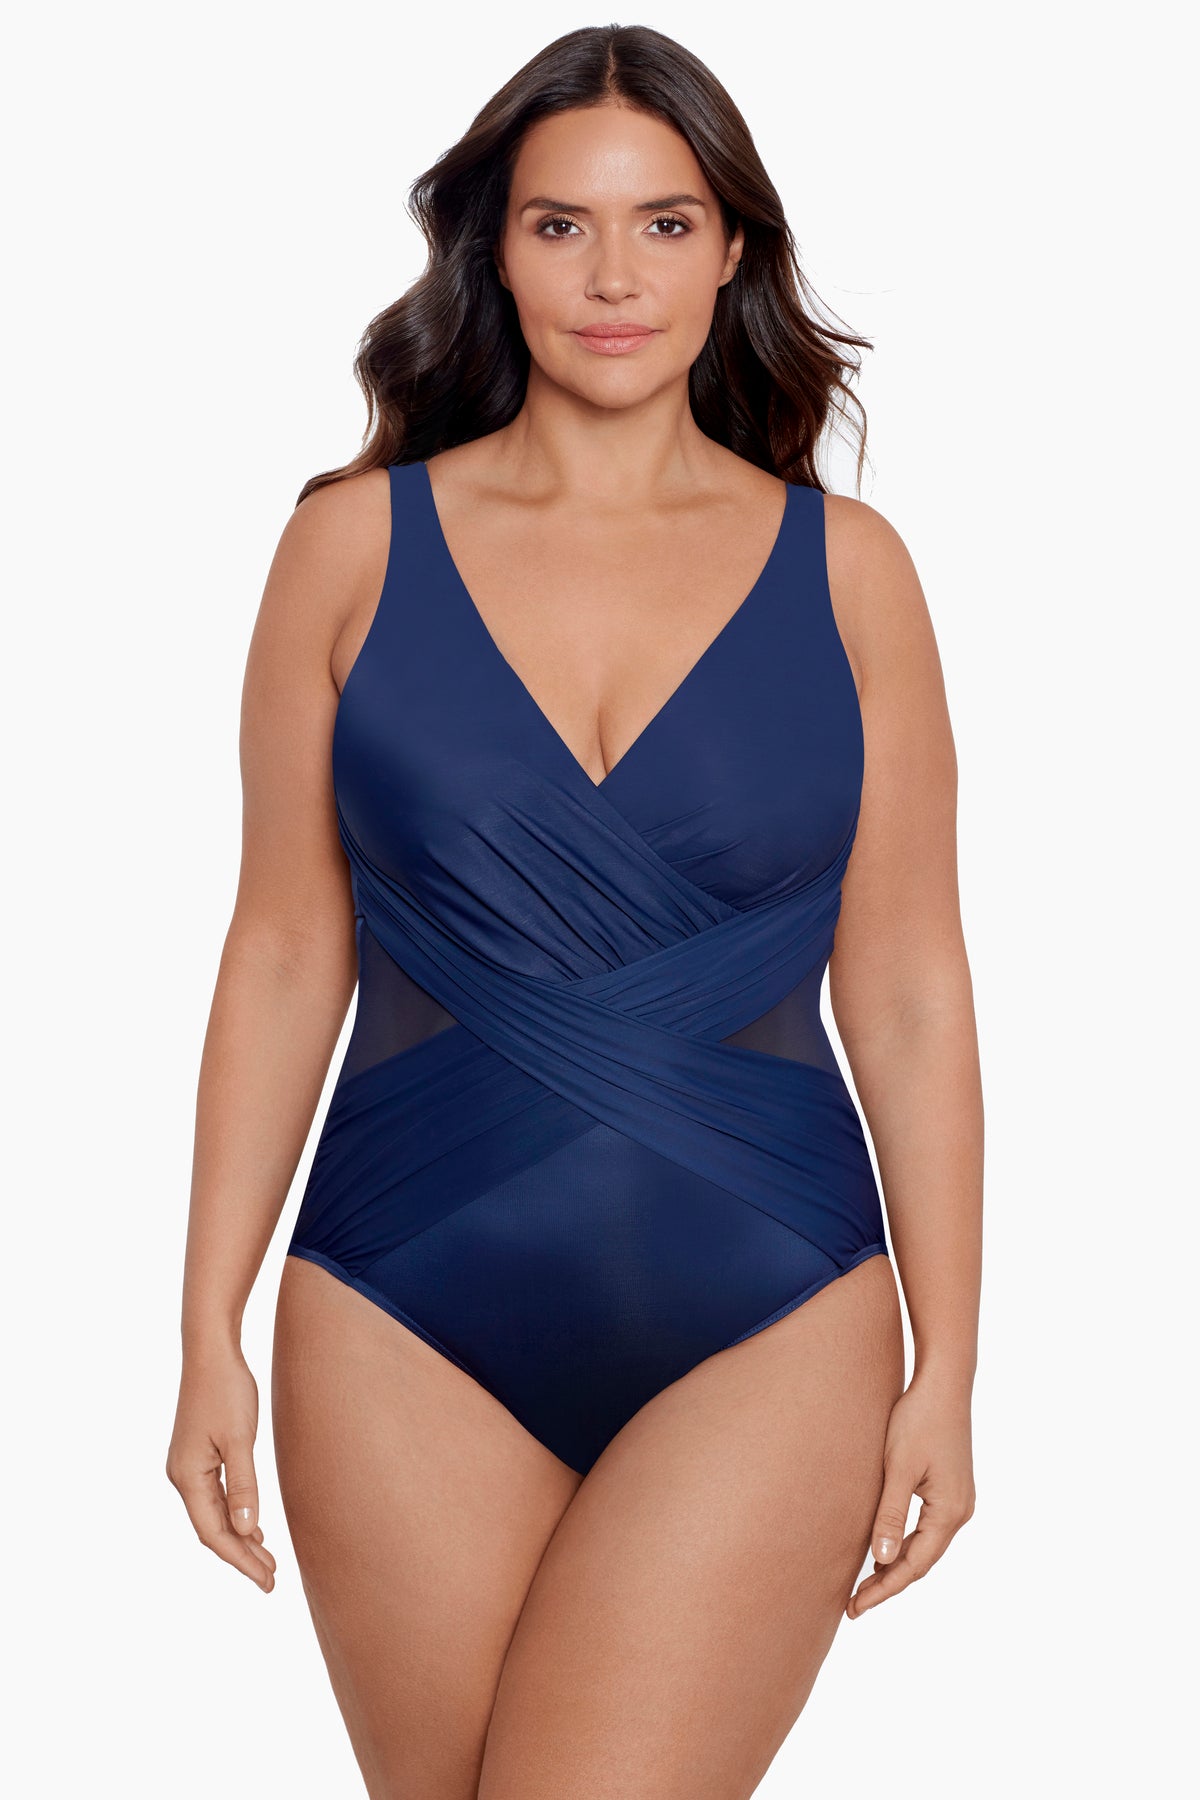 Miraclesuit womens Sexy